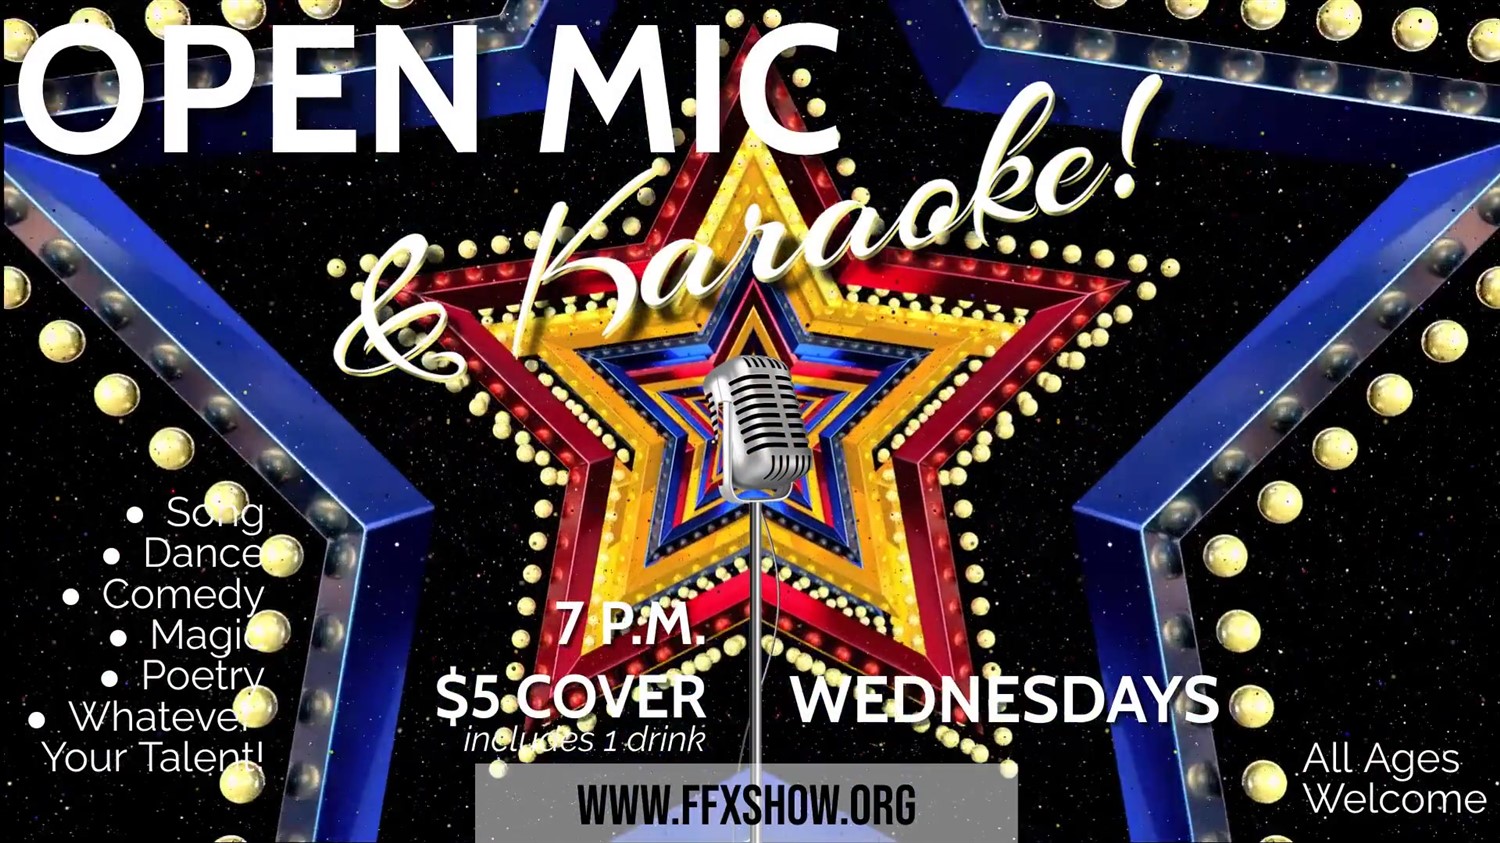 KARAOKE & OPEN MIC NIGHT Come and share your talents on the FFX Stage! on mars 29, 19:00@FFX Theatre - Achetez des billets et obtenez des informations surFamily Fun Xperience tickets.ffxshow.org